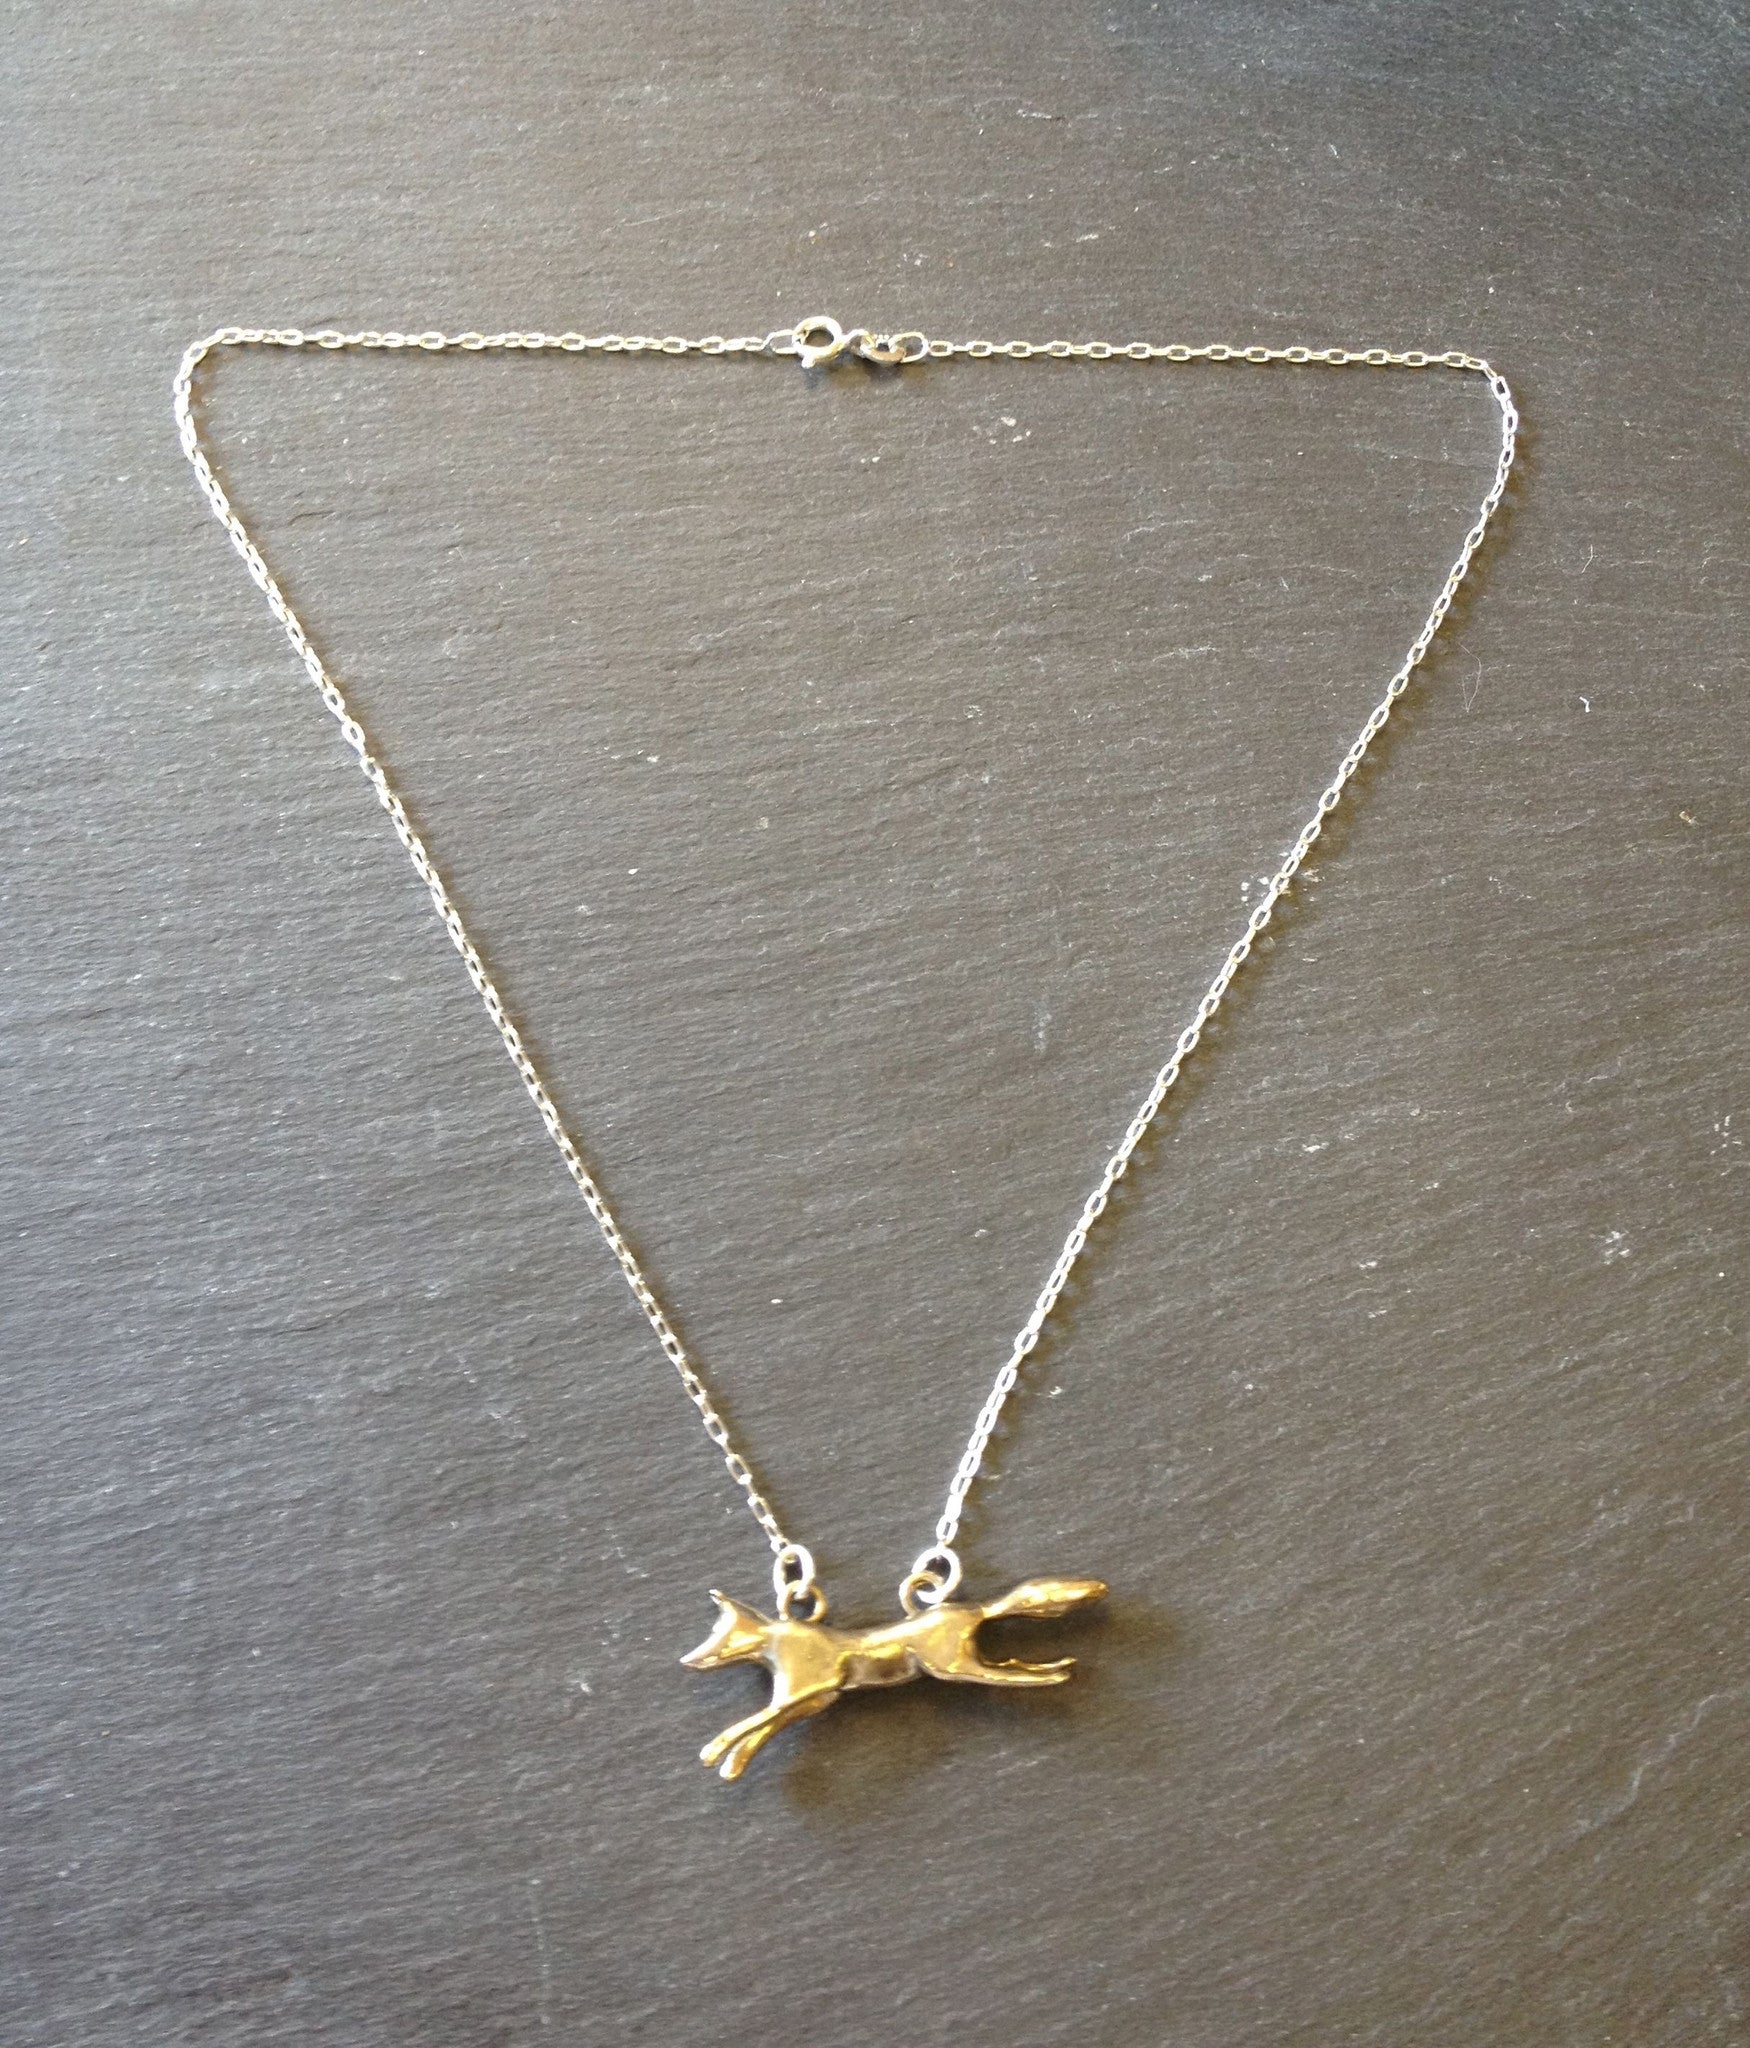 Punk Cute Abstract Fox Pendant, Gold Fox Necklace, 18K Gold, Origami Dainty  | eBay